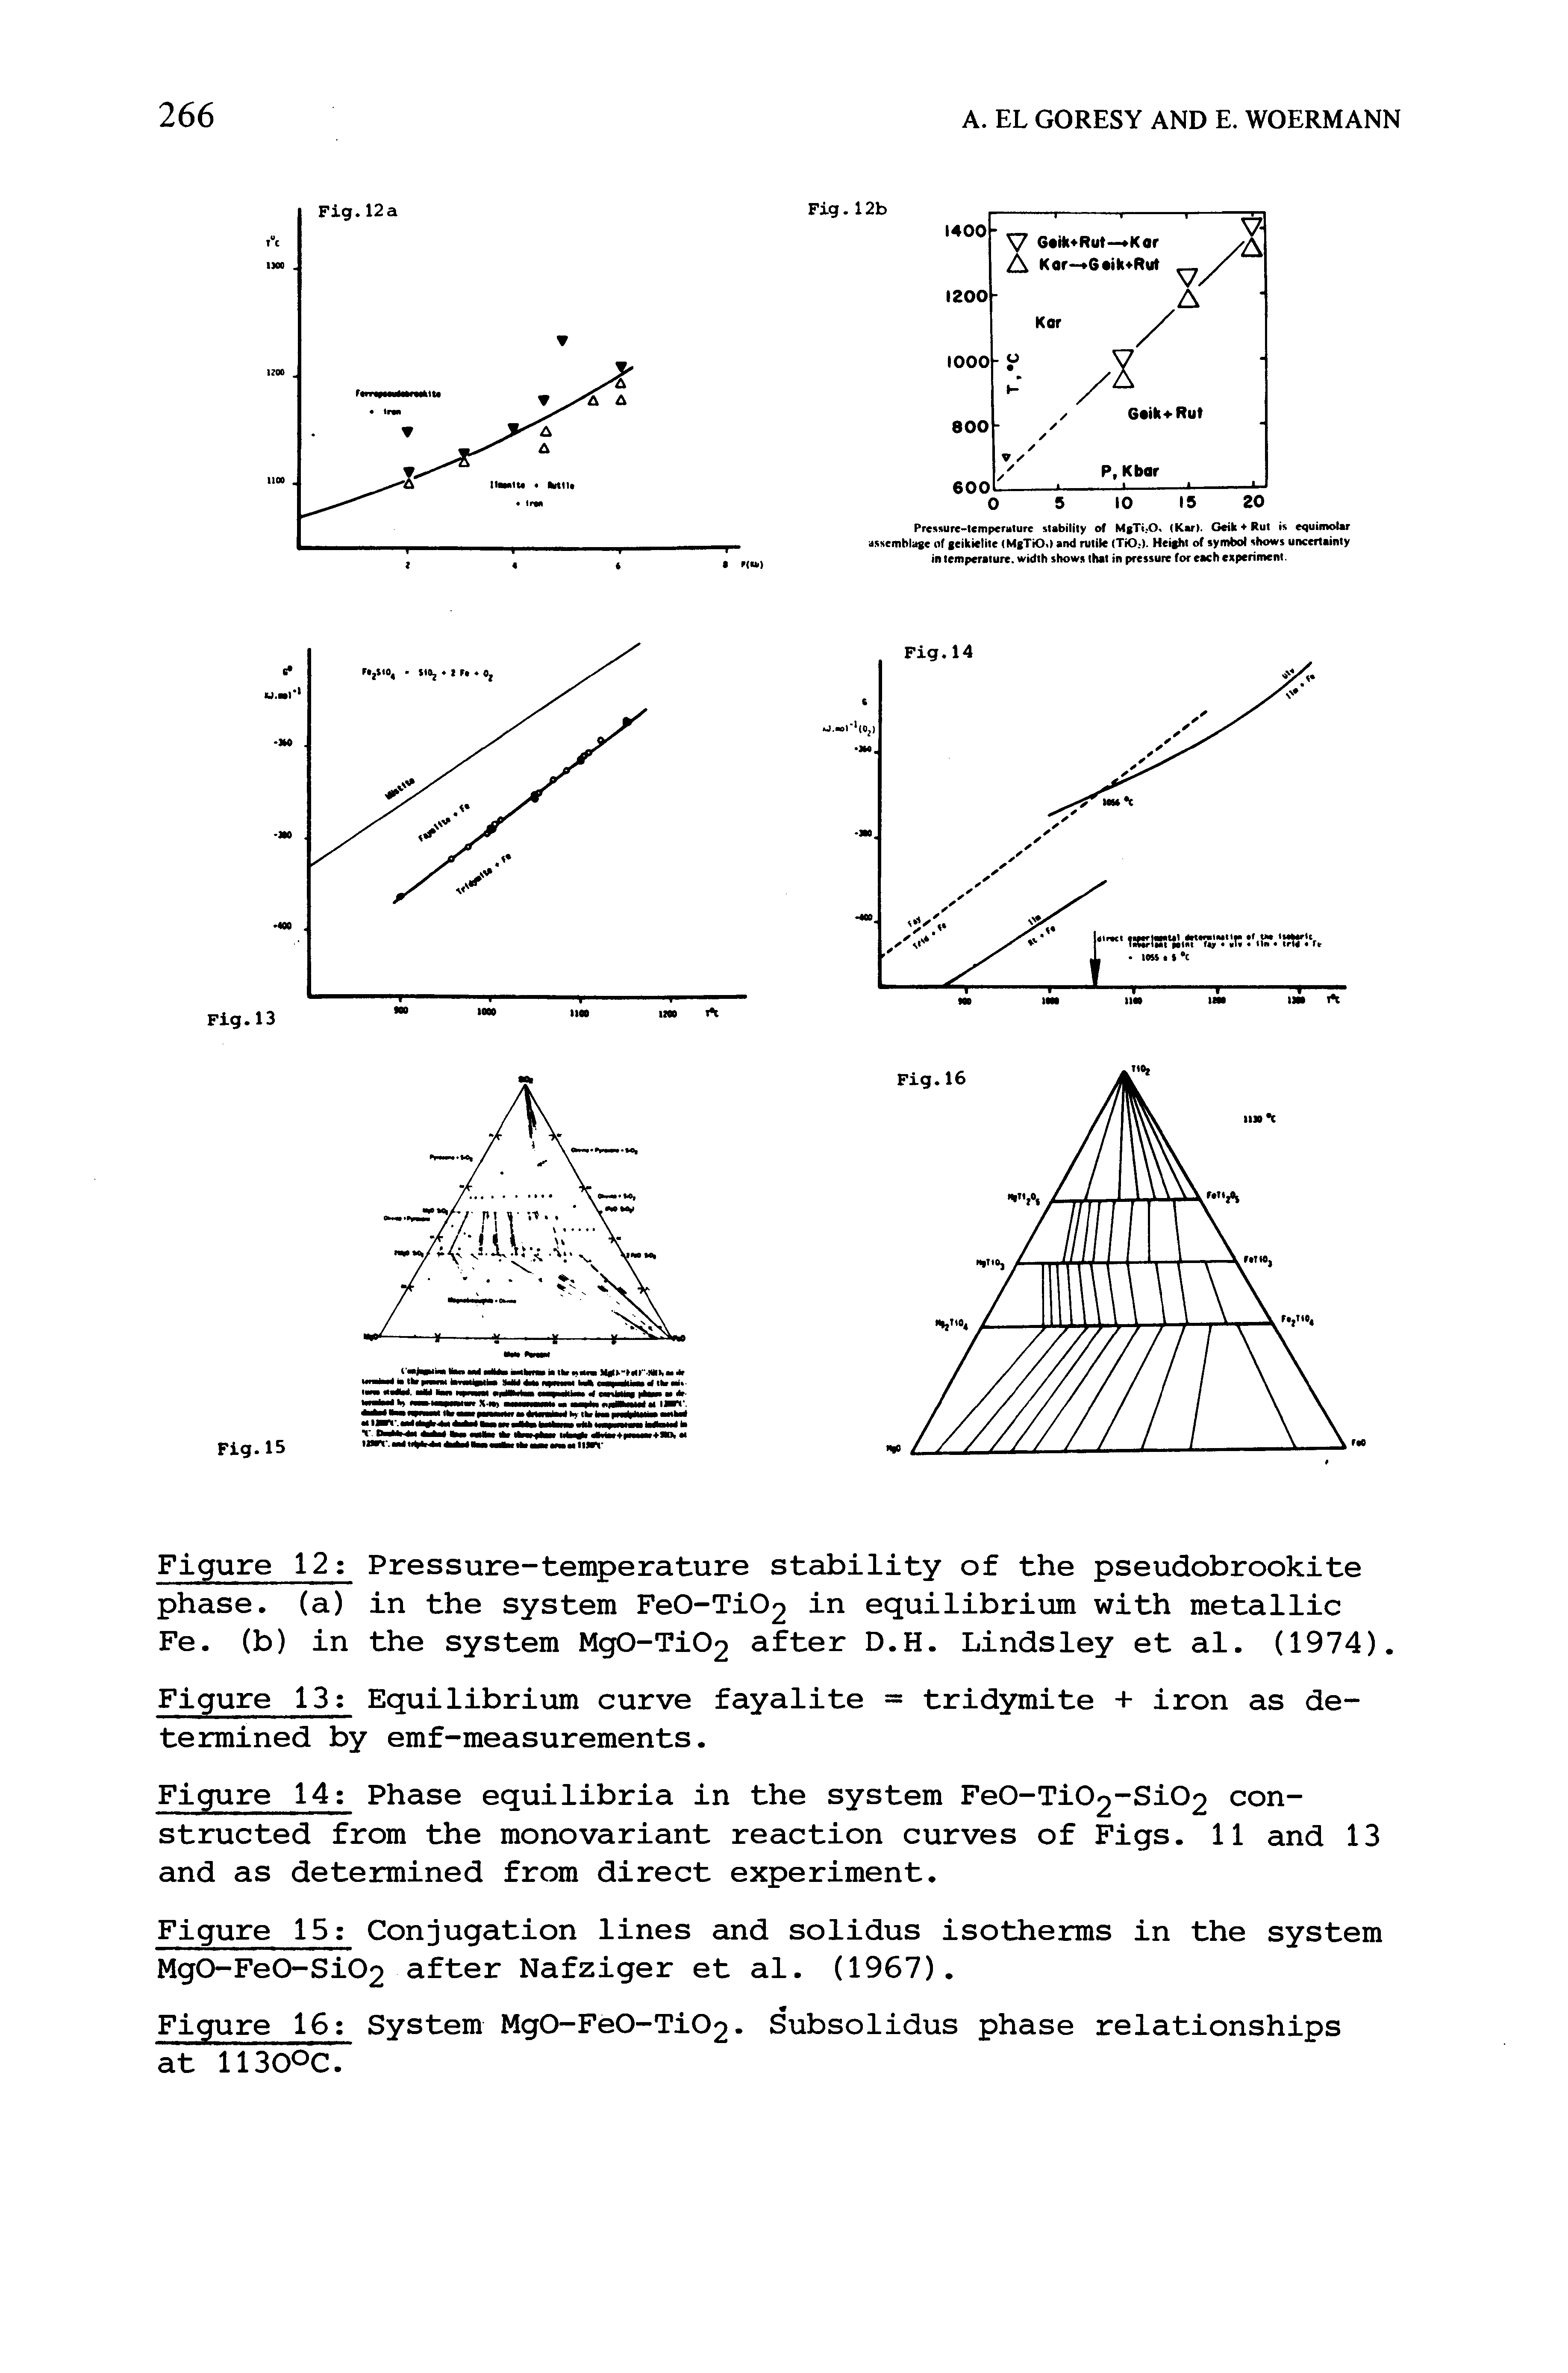 Figure 15 Conjugation lines and solidus isotherms in the system Mg0-Fe0-Si02 after Nafziger et al. (1967).